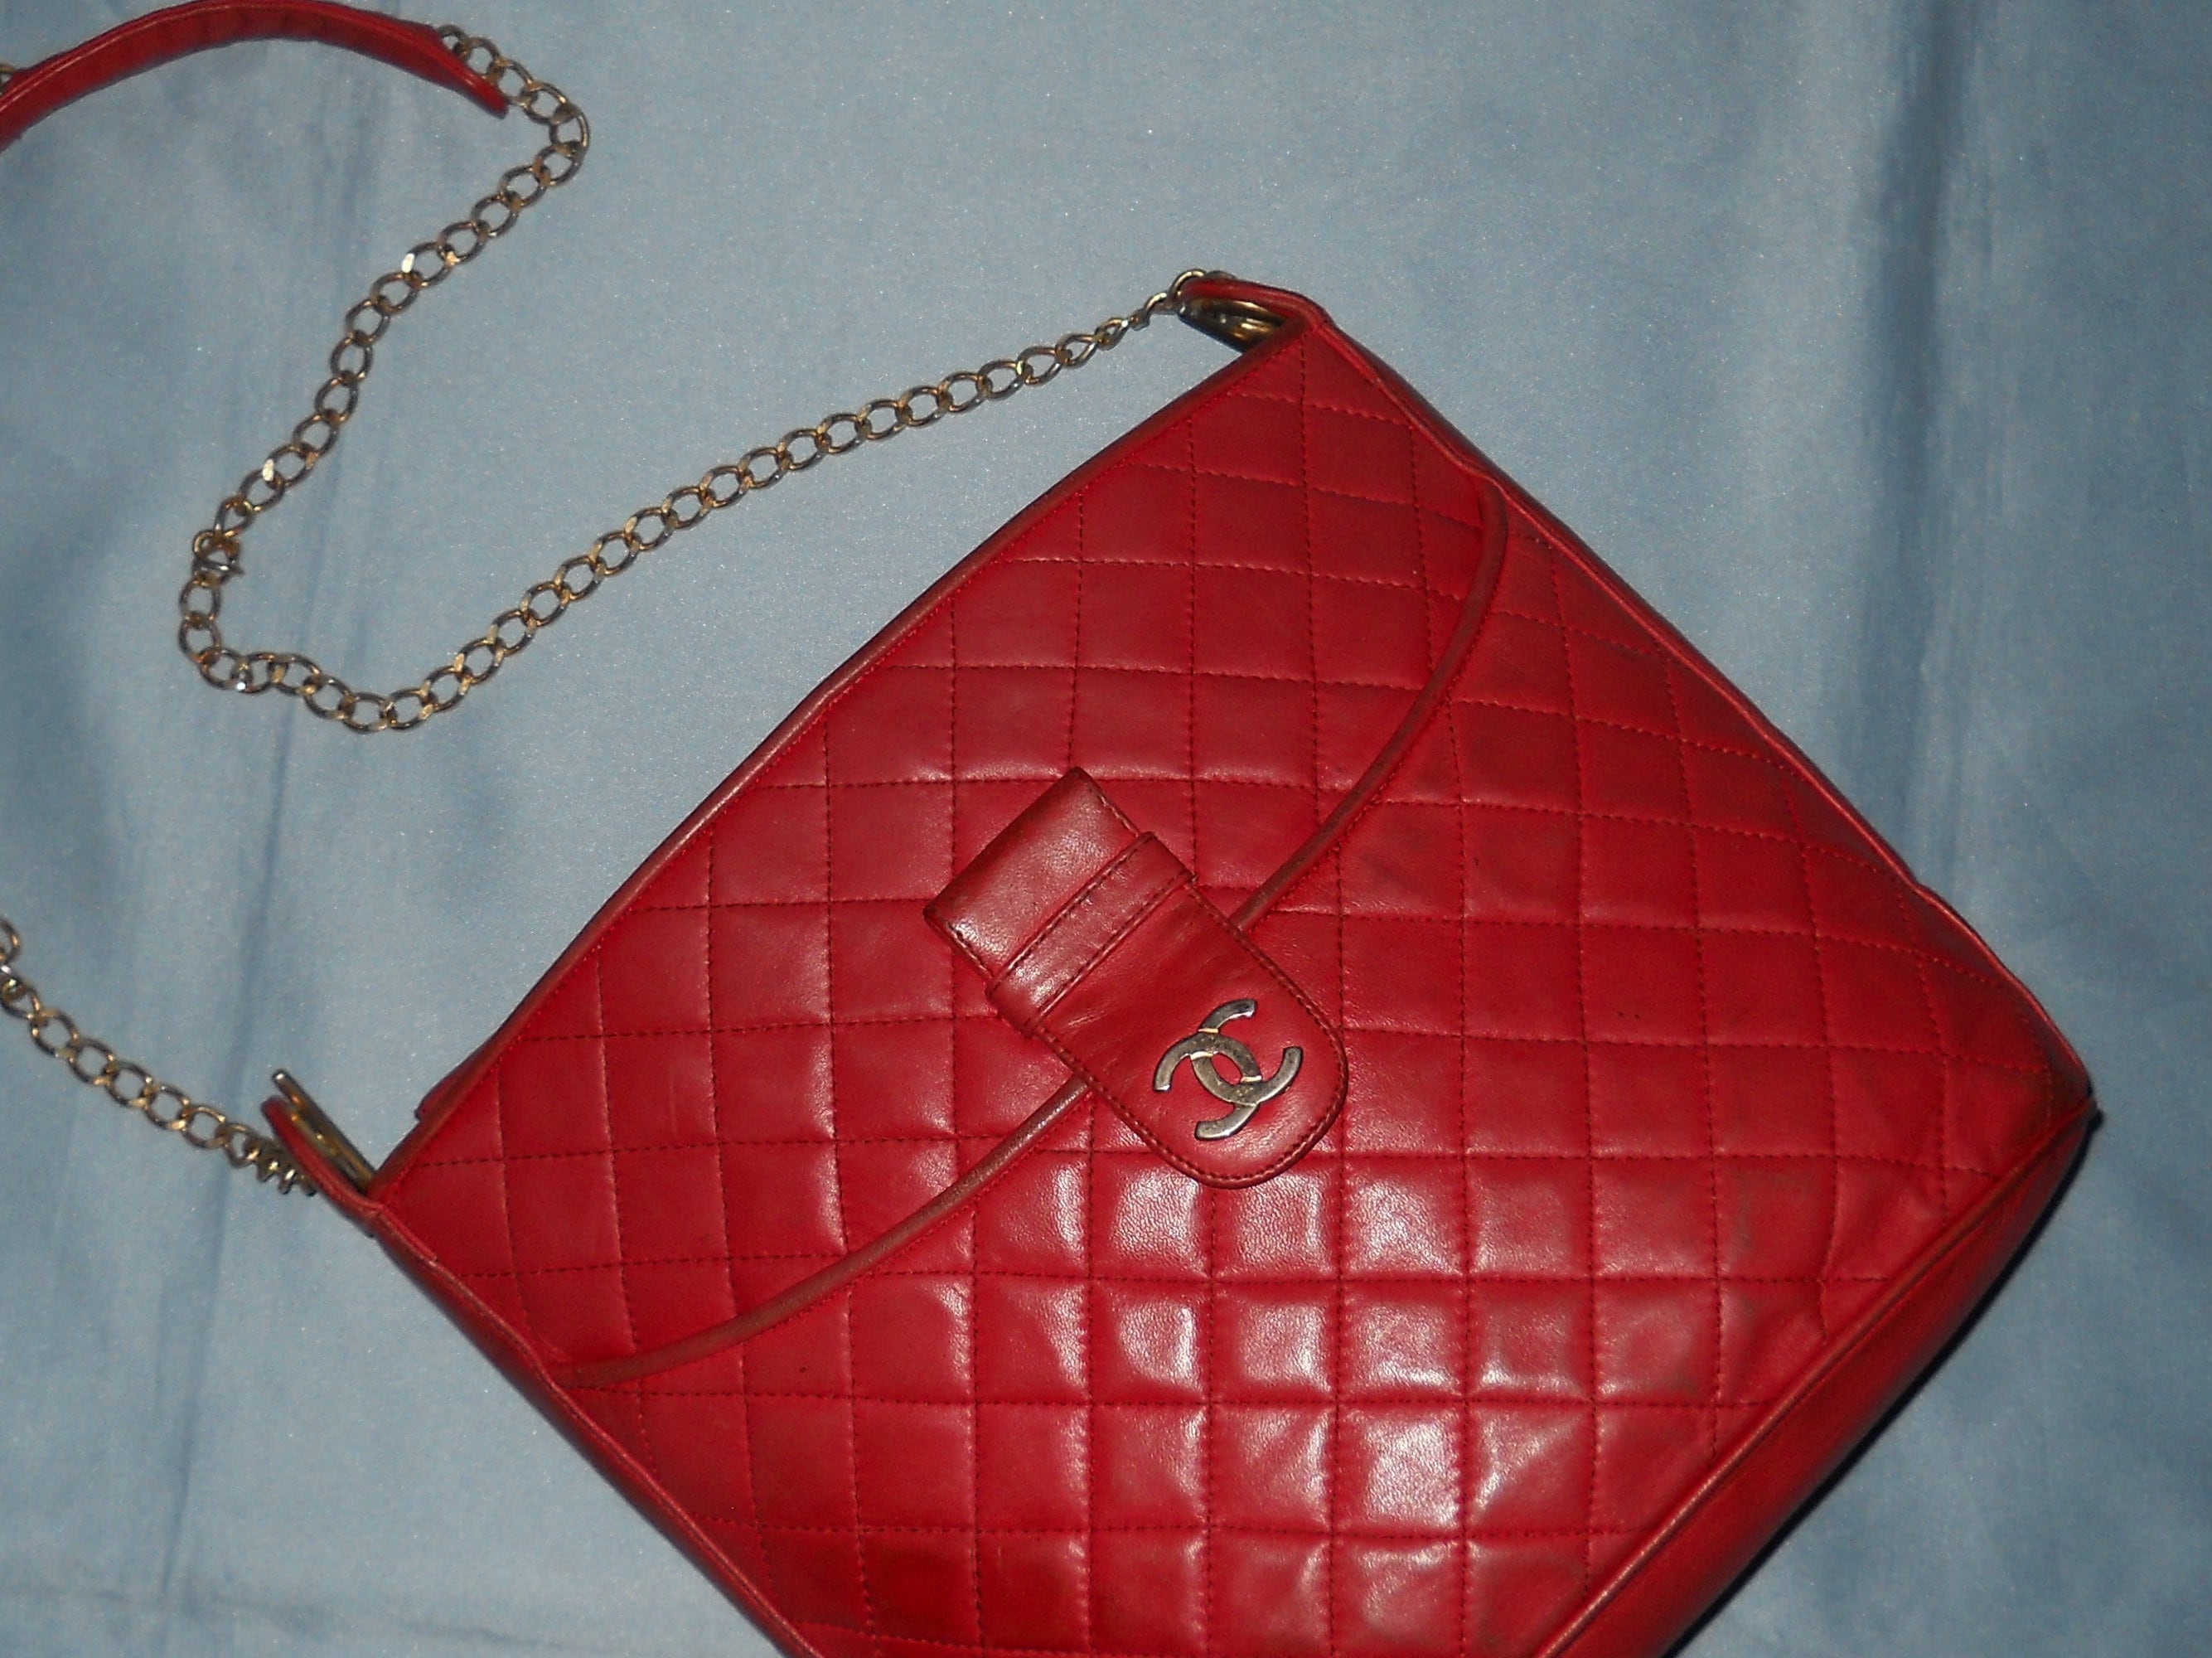 Buy Authentic Vintage Chanel Bag Genuine Leather Online in India 